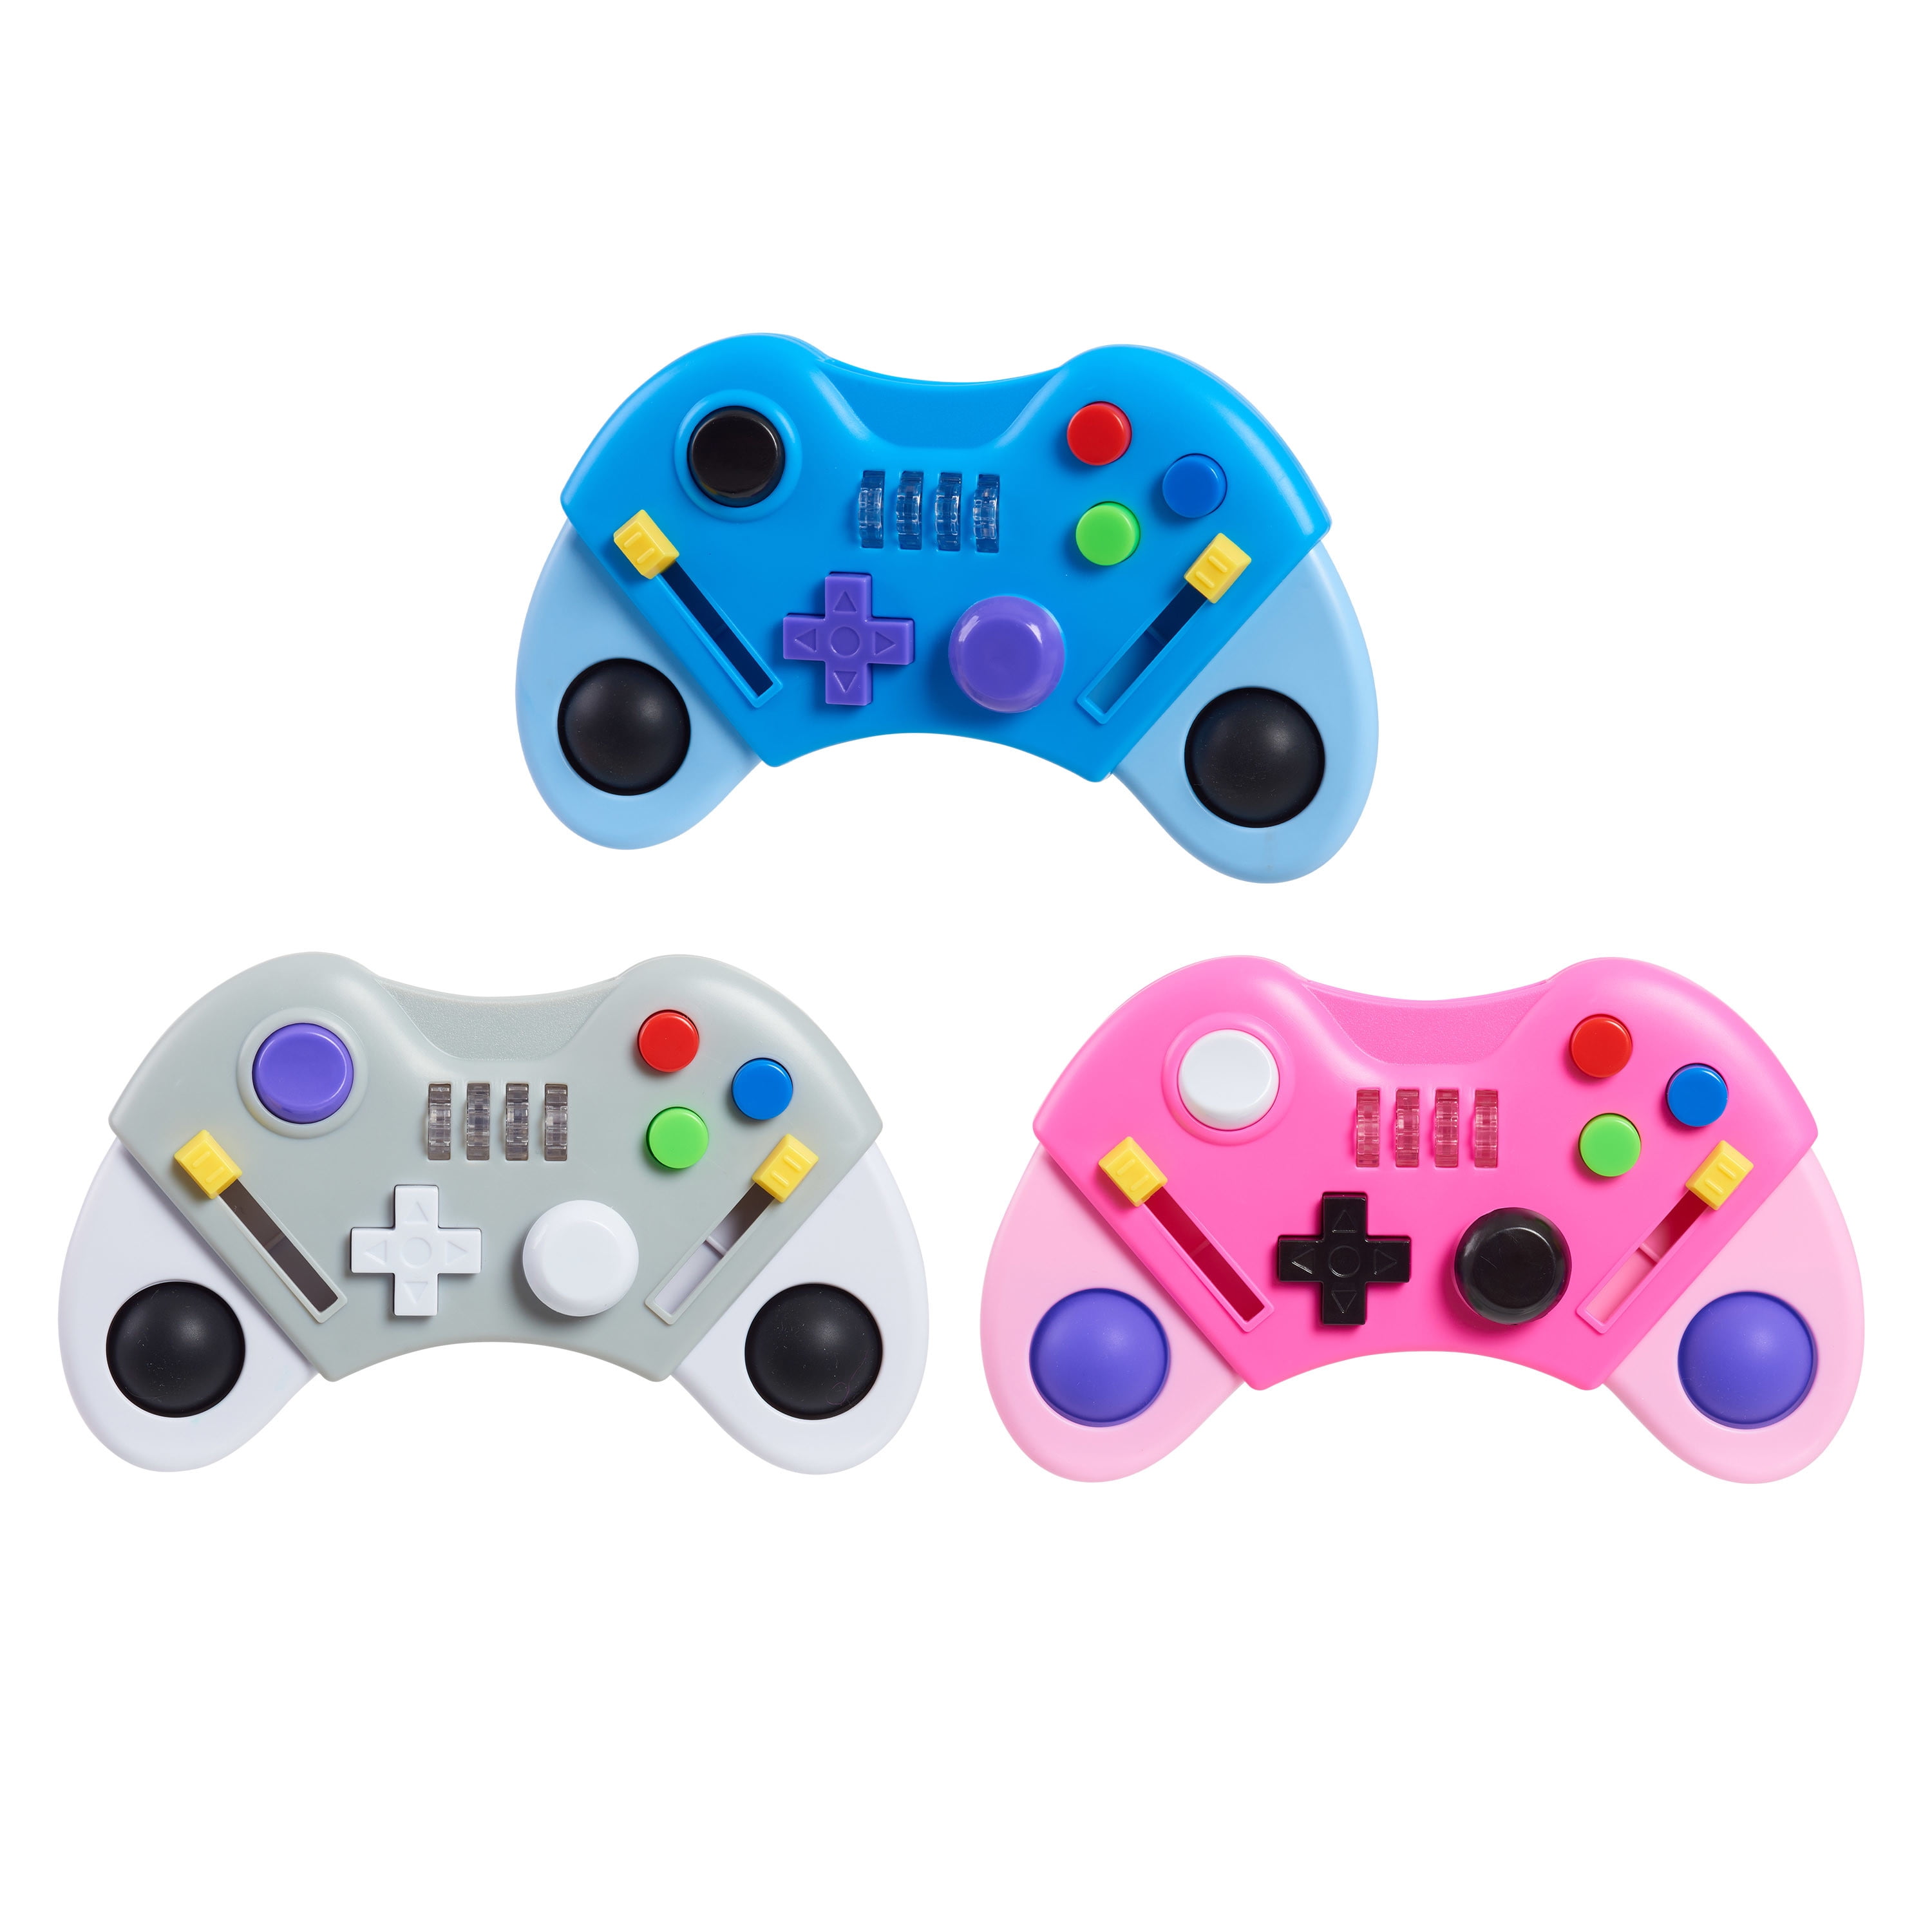 camouflage eksplicit at retfærdiggøre Fidgetz Game Controller Assortment, Styles May Vary, Sold Separately,  Sensory & Fidget, Kids Toys for Ages 3 Up, Gifts and Presents - Walmart.com